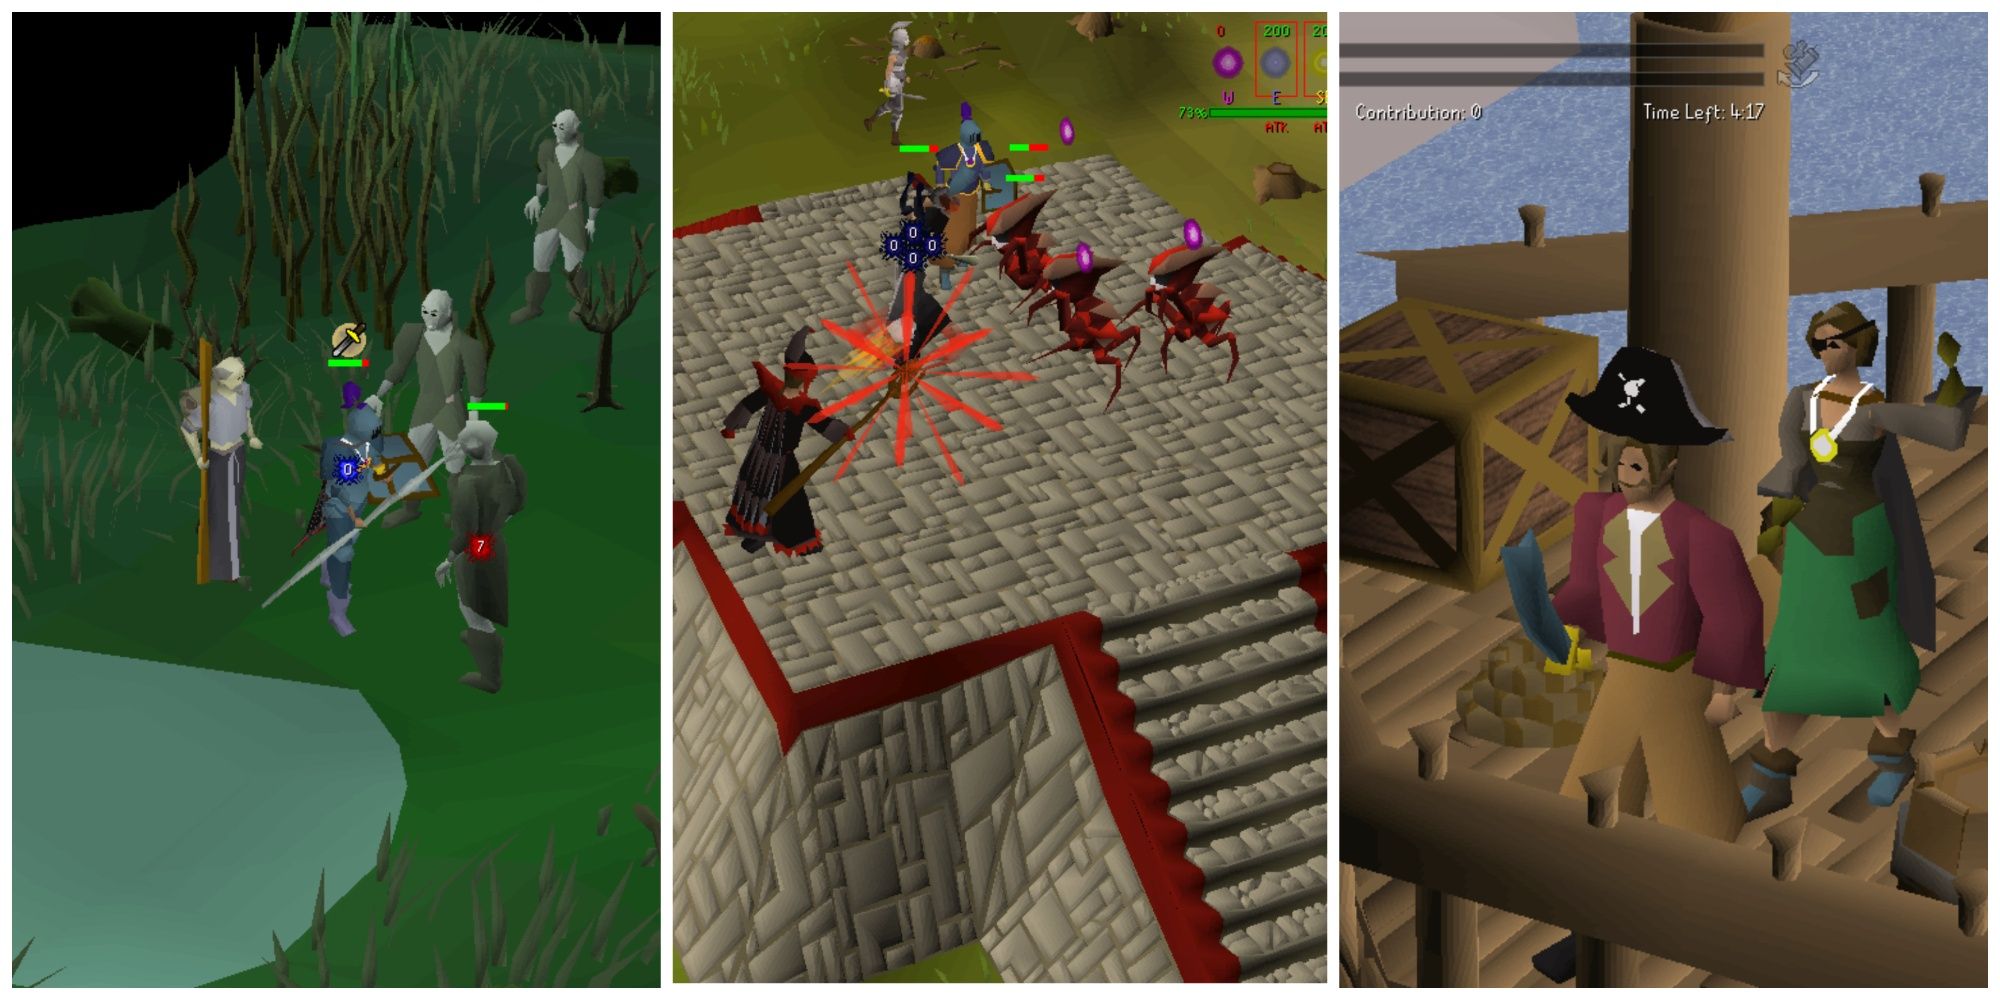 A collage showing three Old School Runescape minigames.